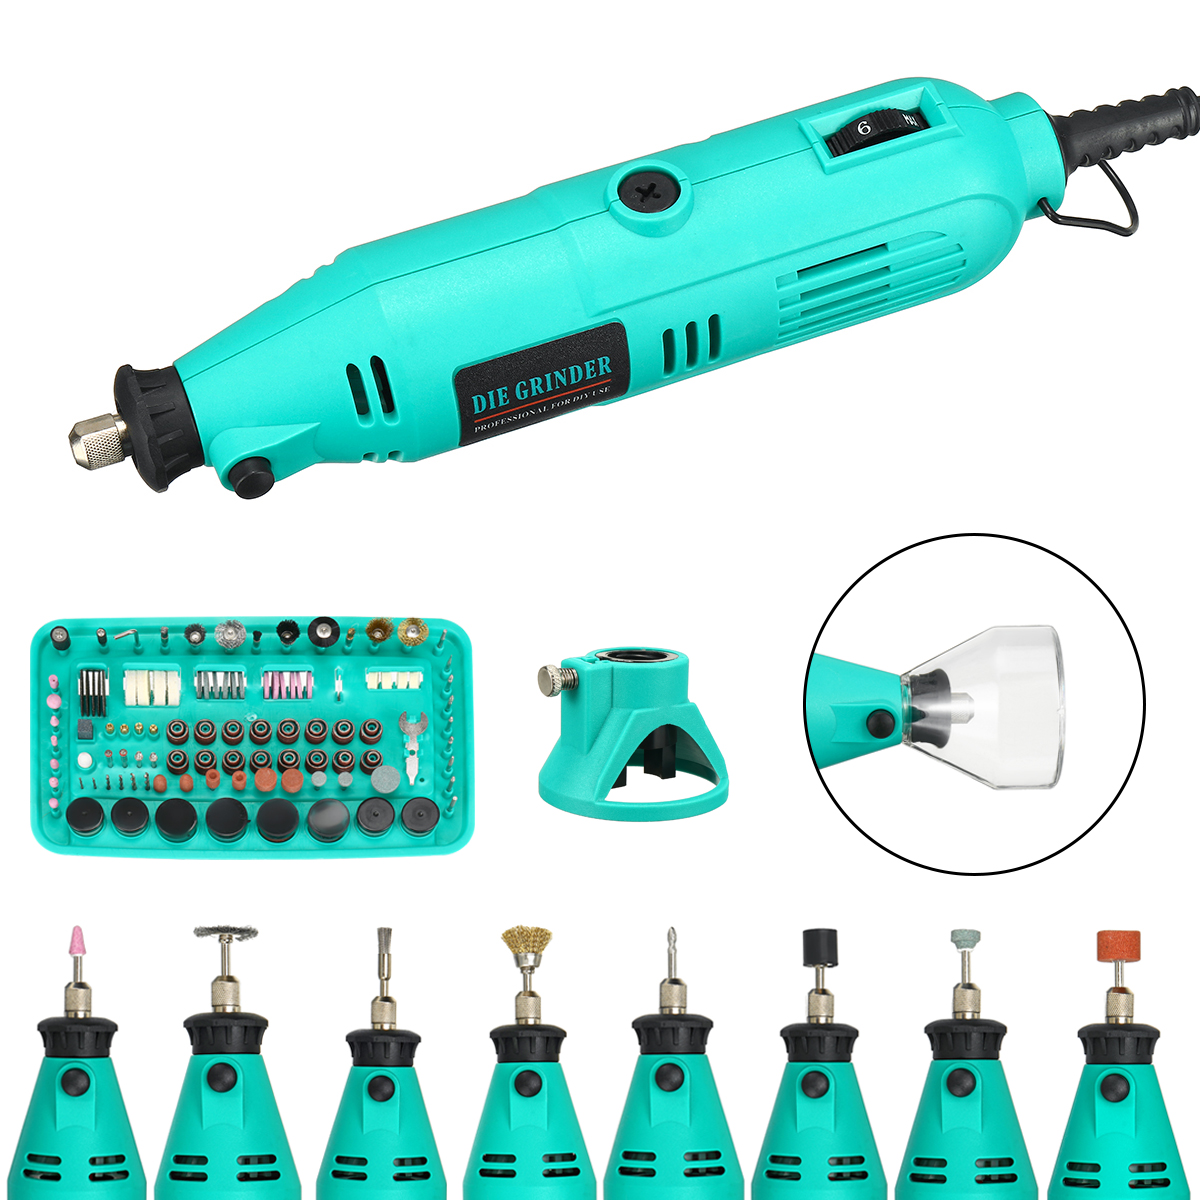 130W-Electric-Grinder-Drill-Engraver-Rotary-Tool-Variable-Speed-Rotary-Carving-Polishing-Machine-110-1905899-4